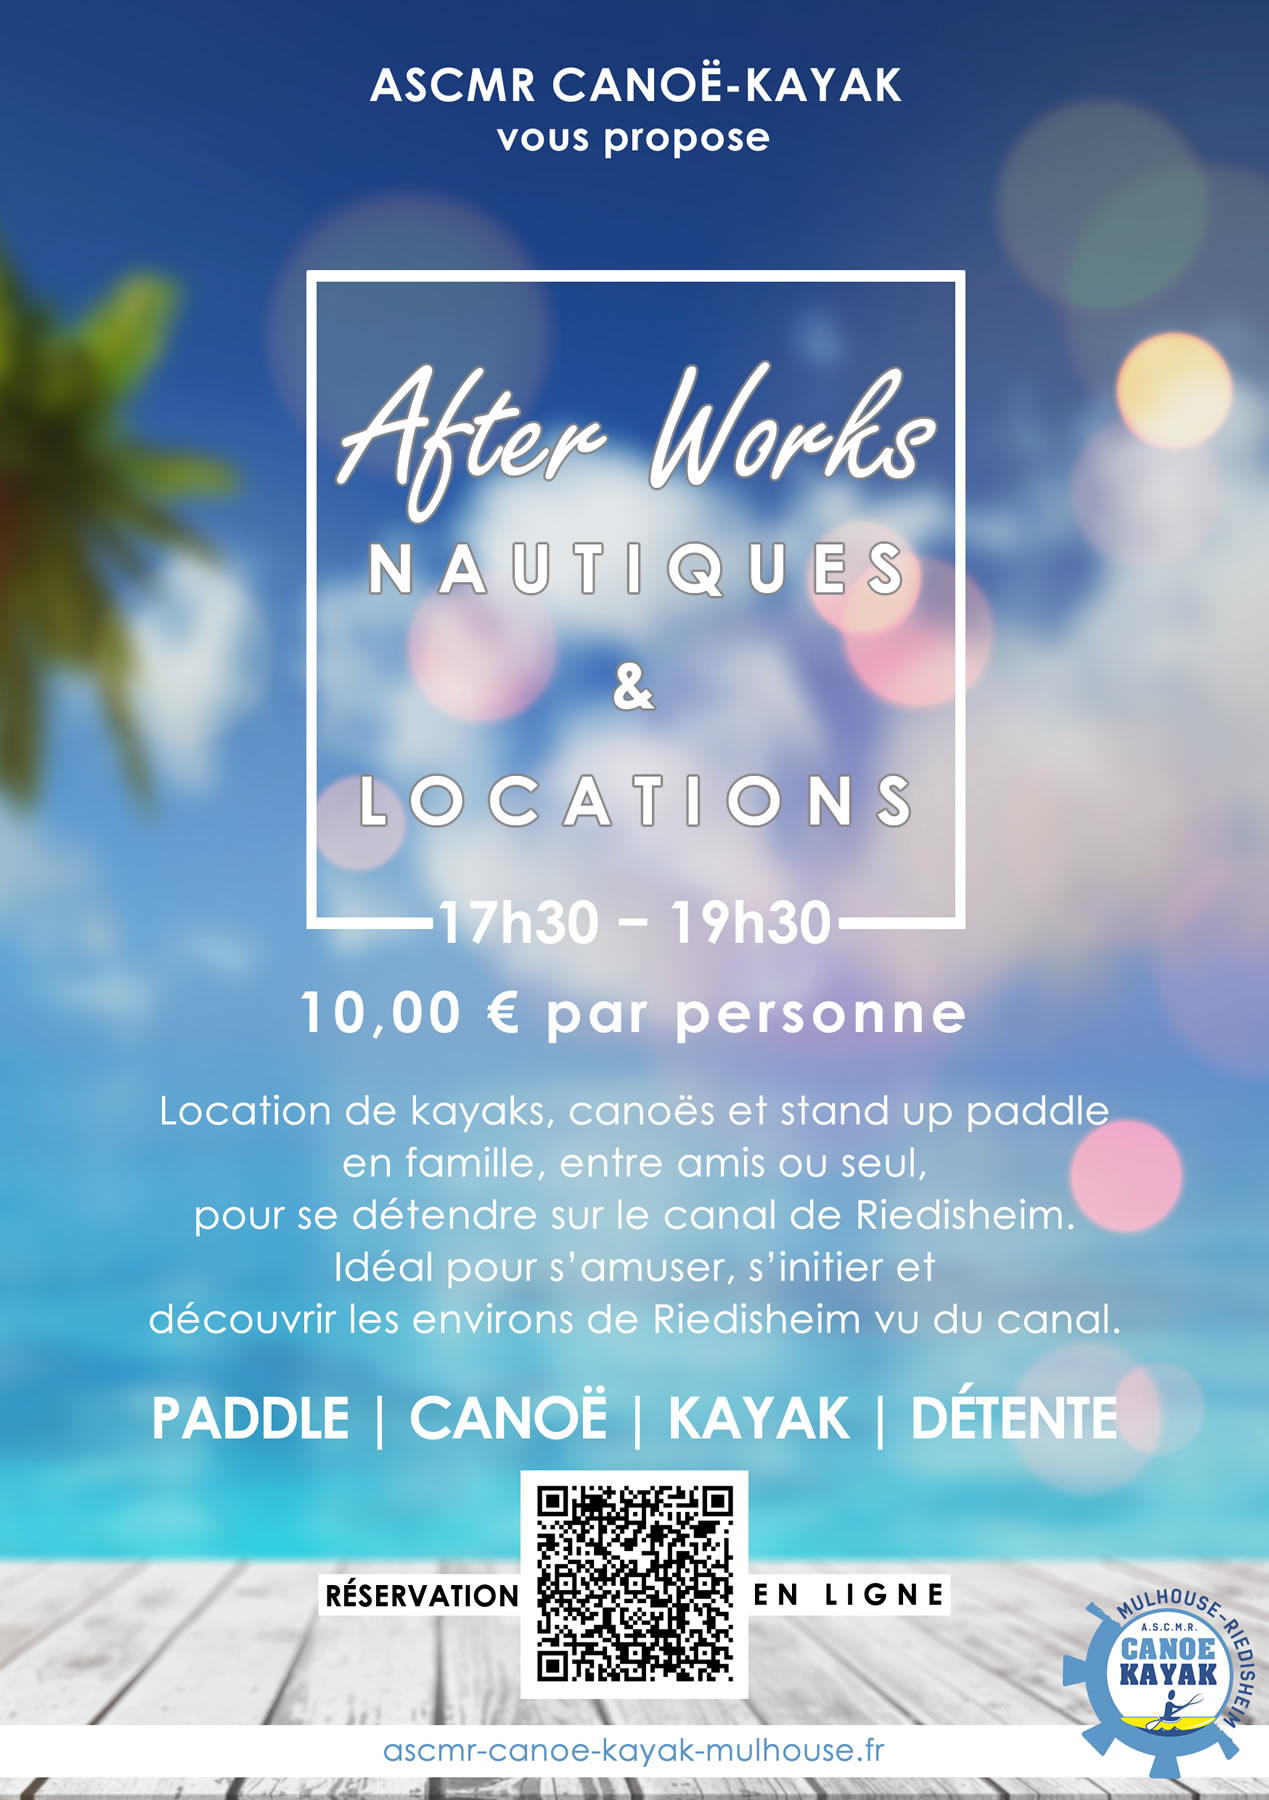 After Works nautiques & locations